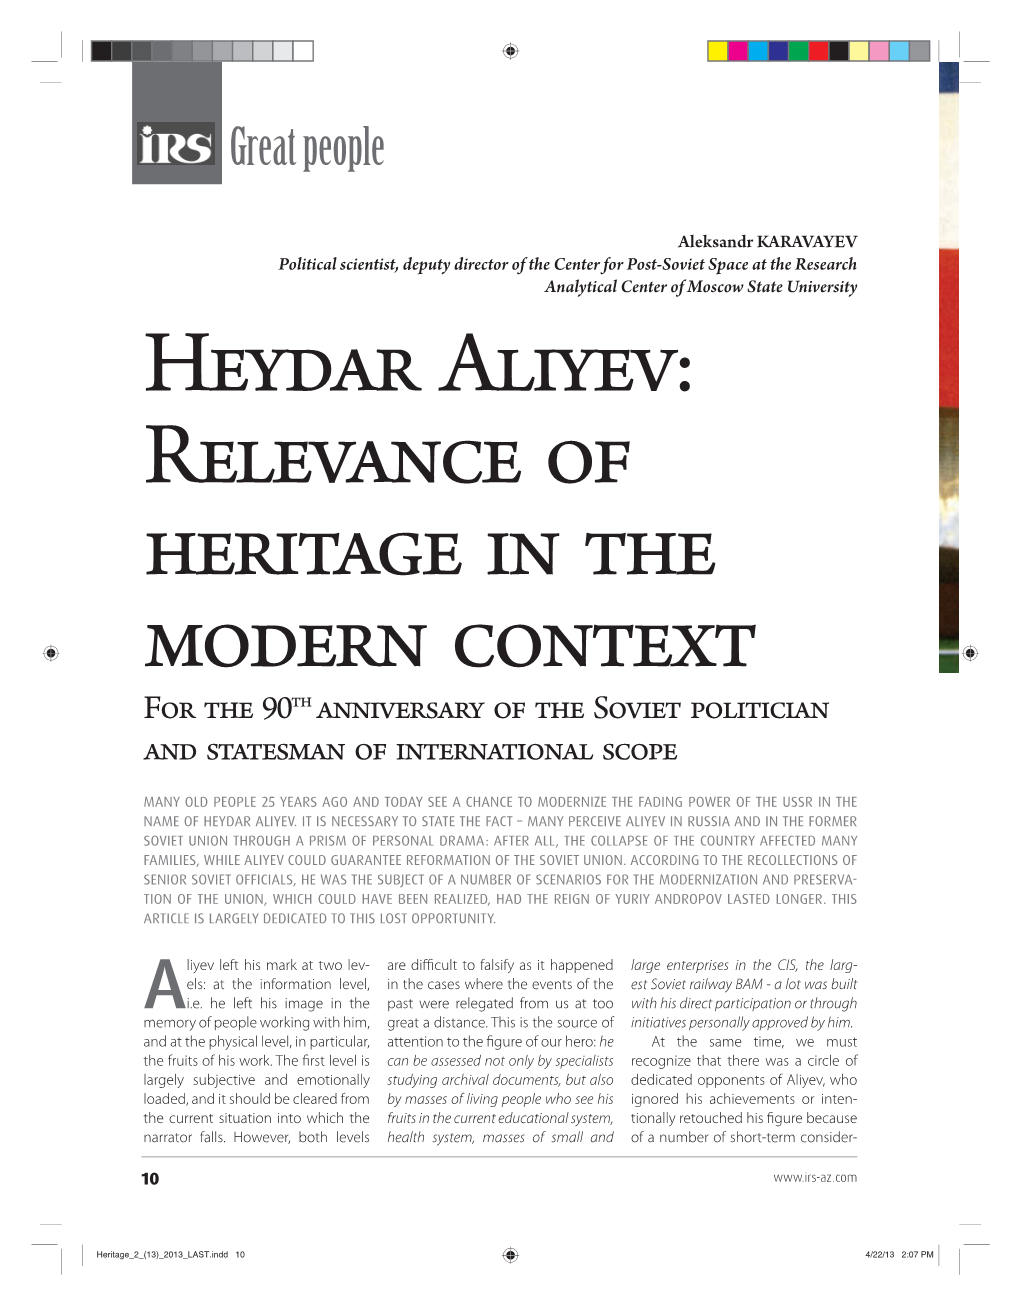 Heydar Aliyev: Relevance of Heritage in the Modern Context for the 90Th Anniversary of the Soviet Politician and Statesman of International Scope